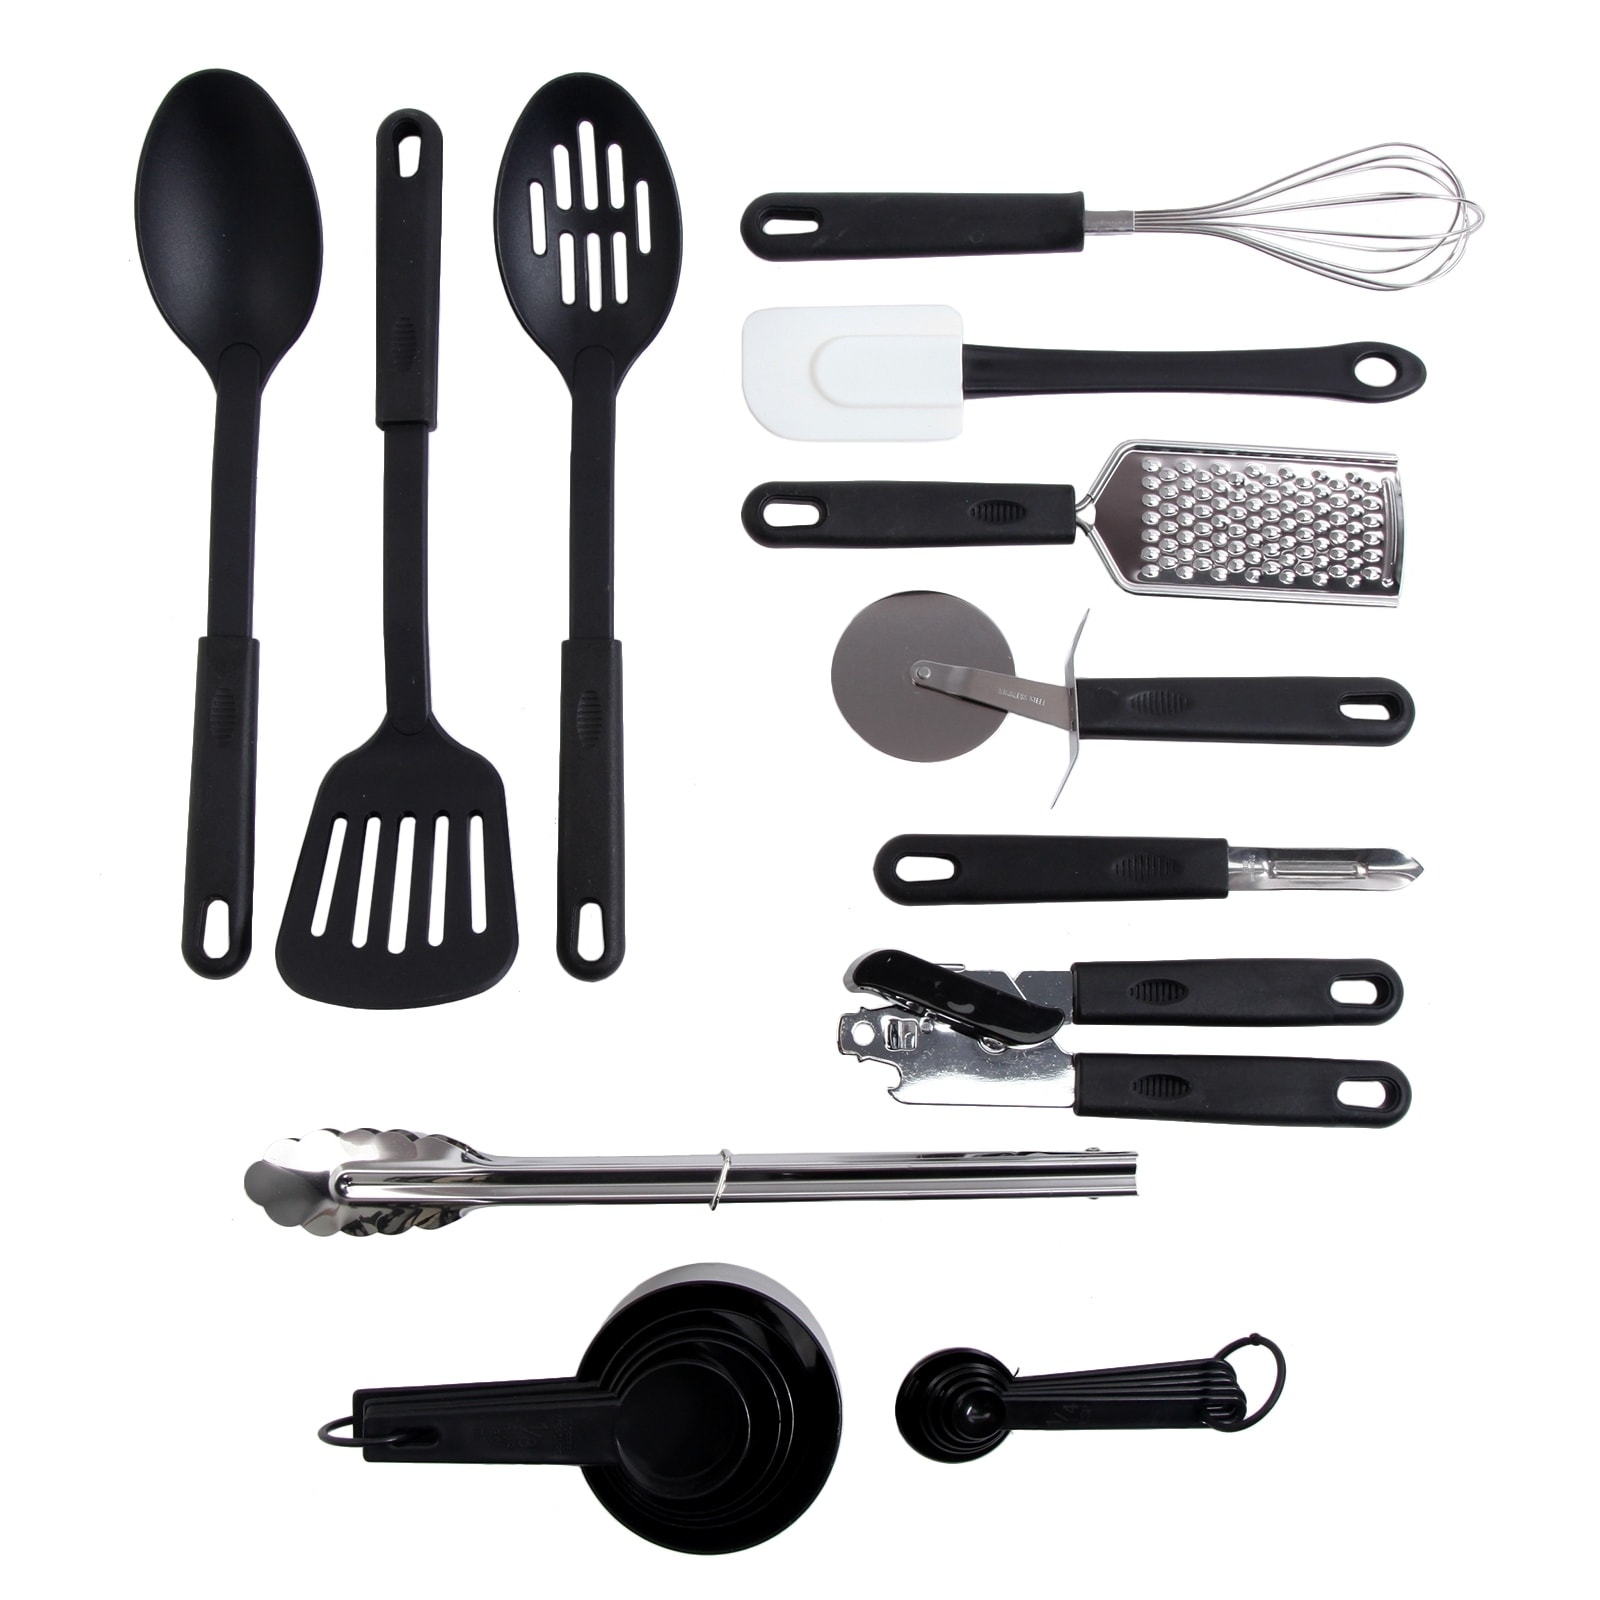 https://ak1.ostkcdn.com/images/products/is/images/direct/ce82e91472e6ffcf763665f1b004b535a369a0a0/Gibson-Total-Kitchen-20-Piece-Tool-Gadget-Prepare-and-Serve-Combo-Set.jpg